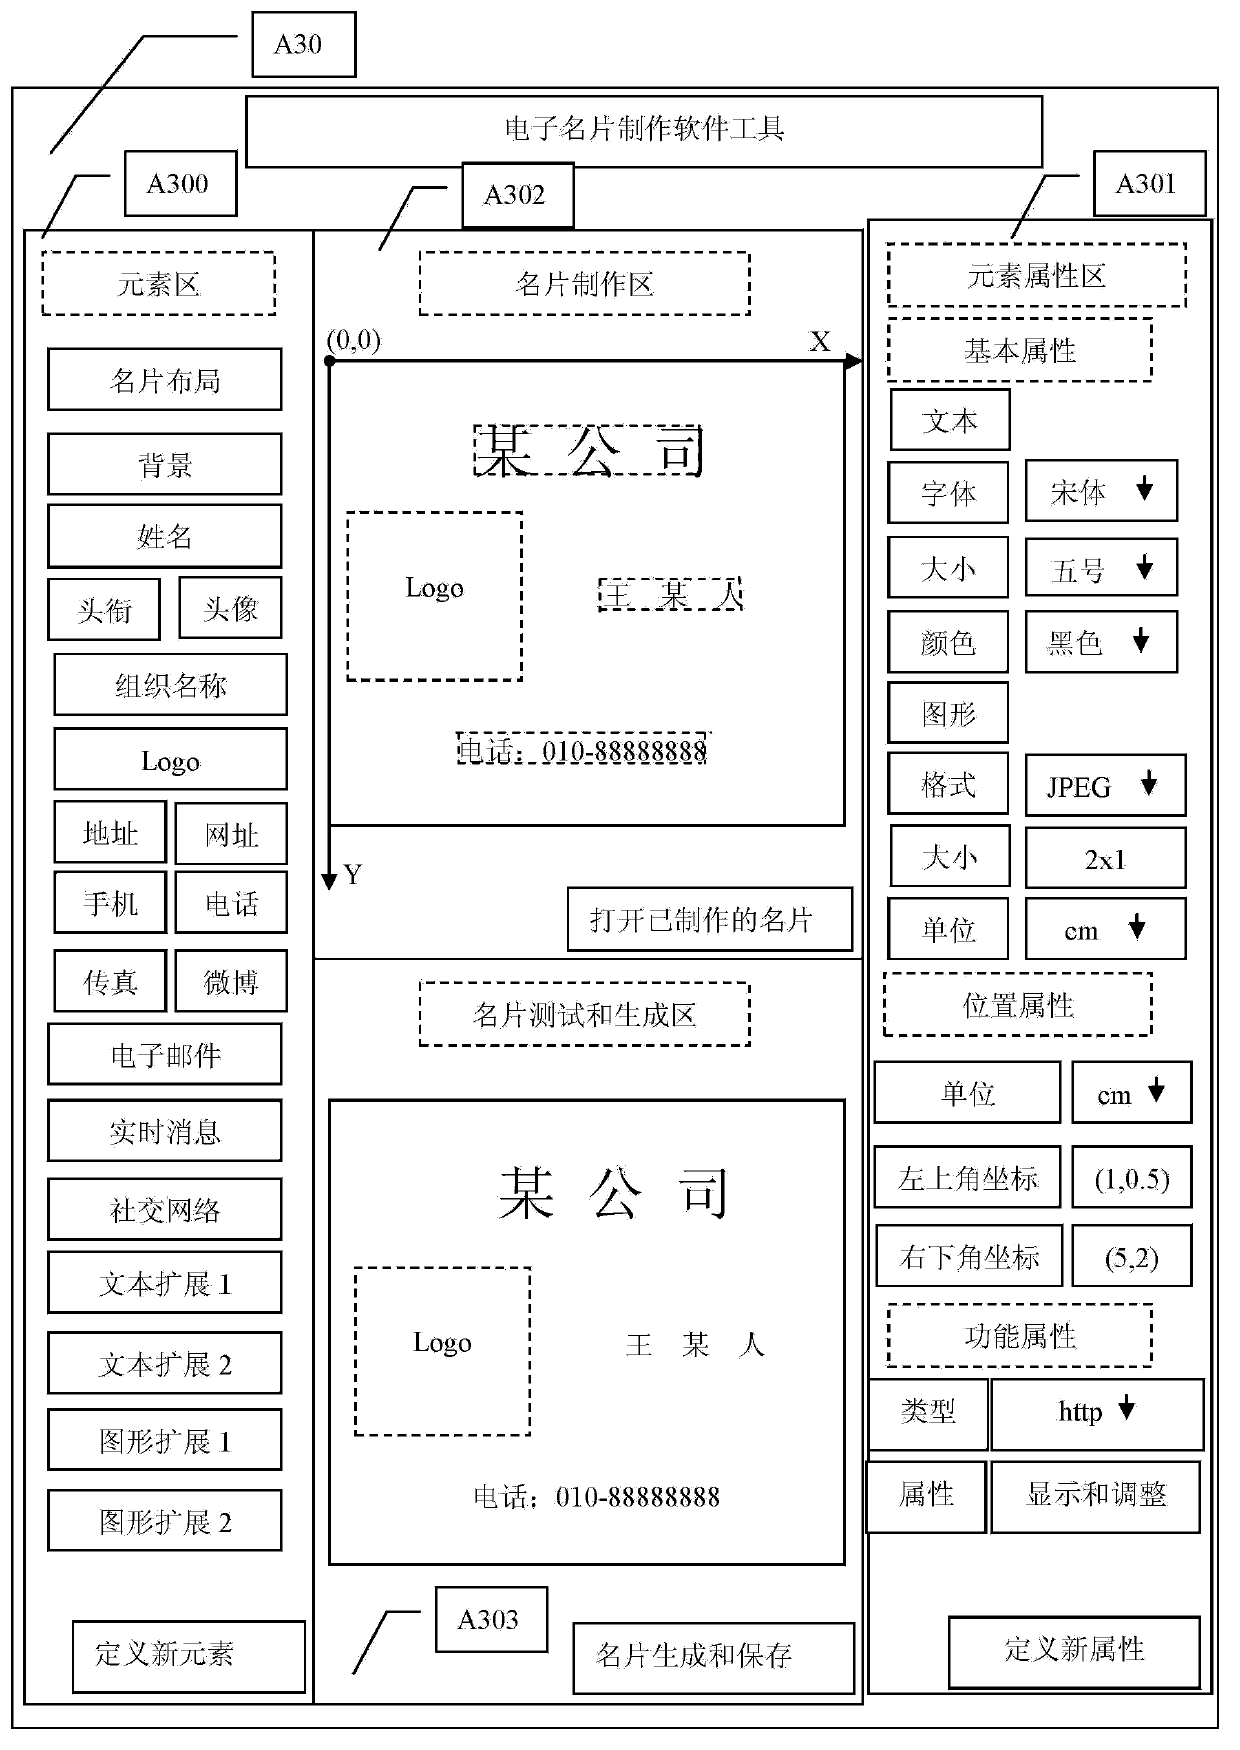 Novel electronic business card manufacture, display and use method